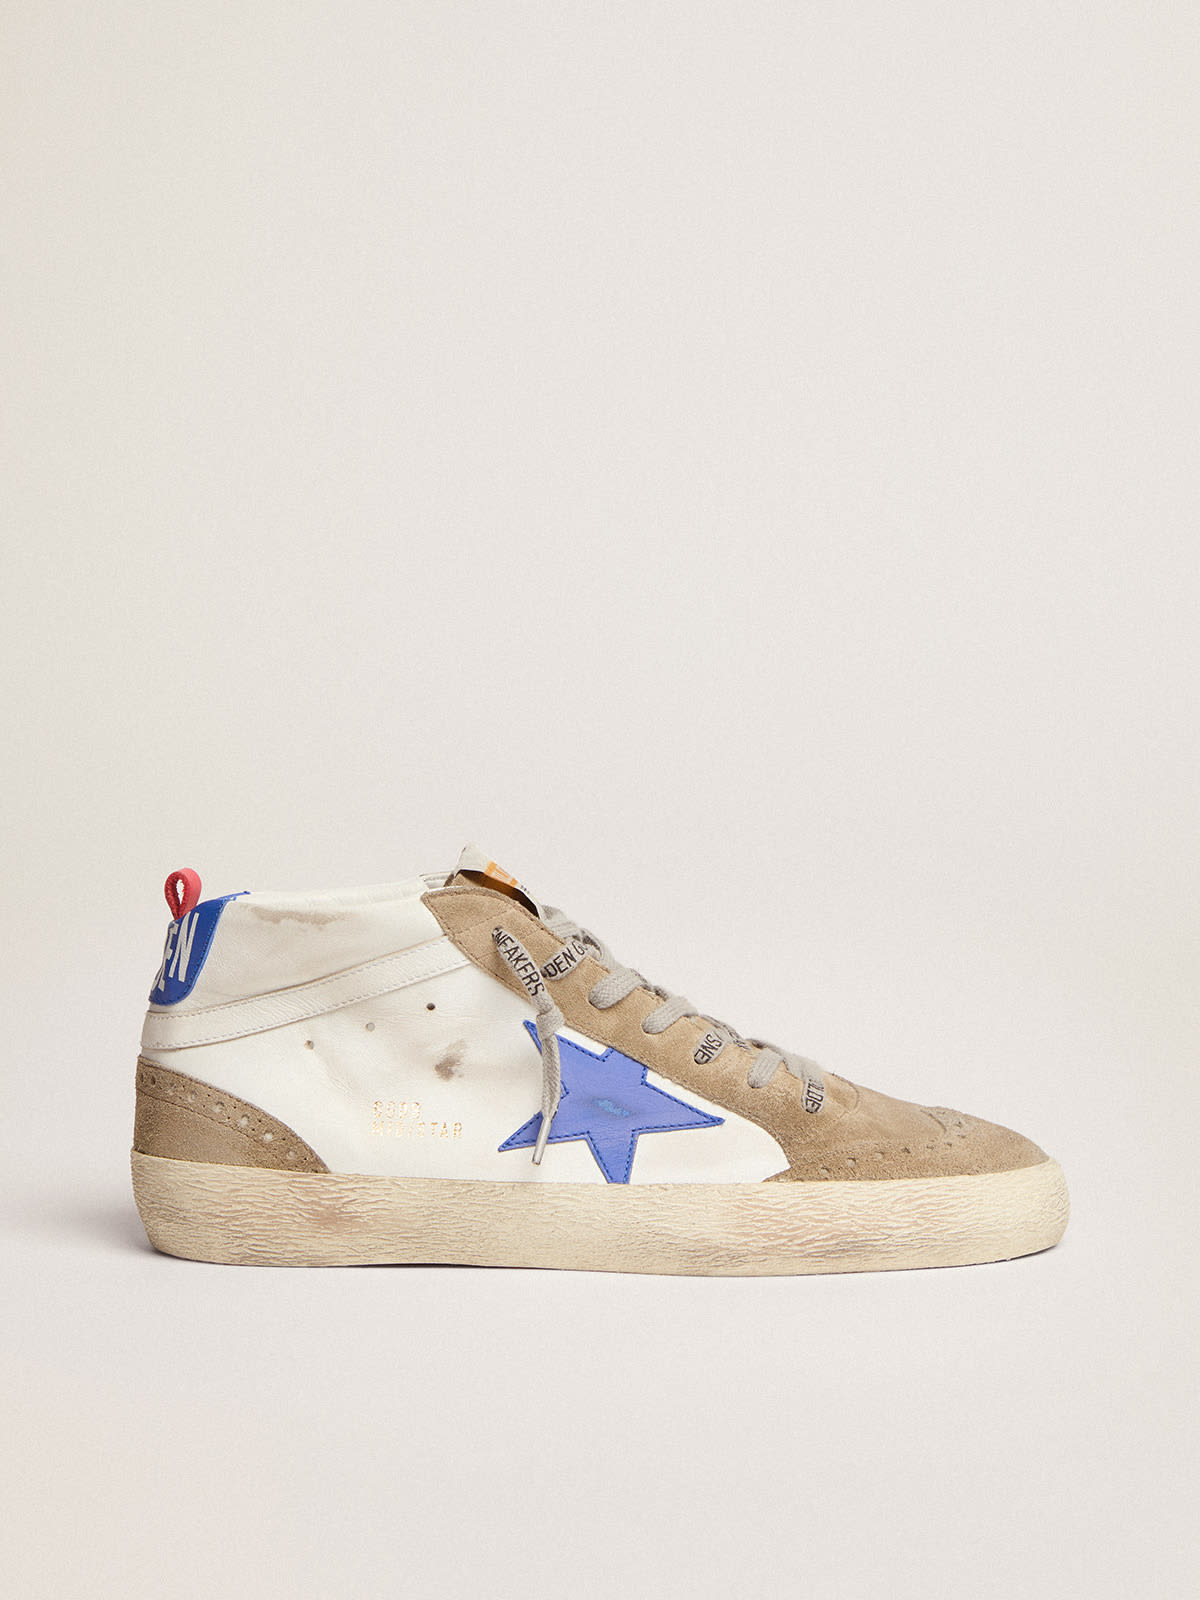 Golden Goose - Men's Mid Star in white leather with blue star and dove gray inserts in 